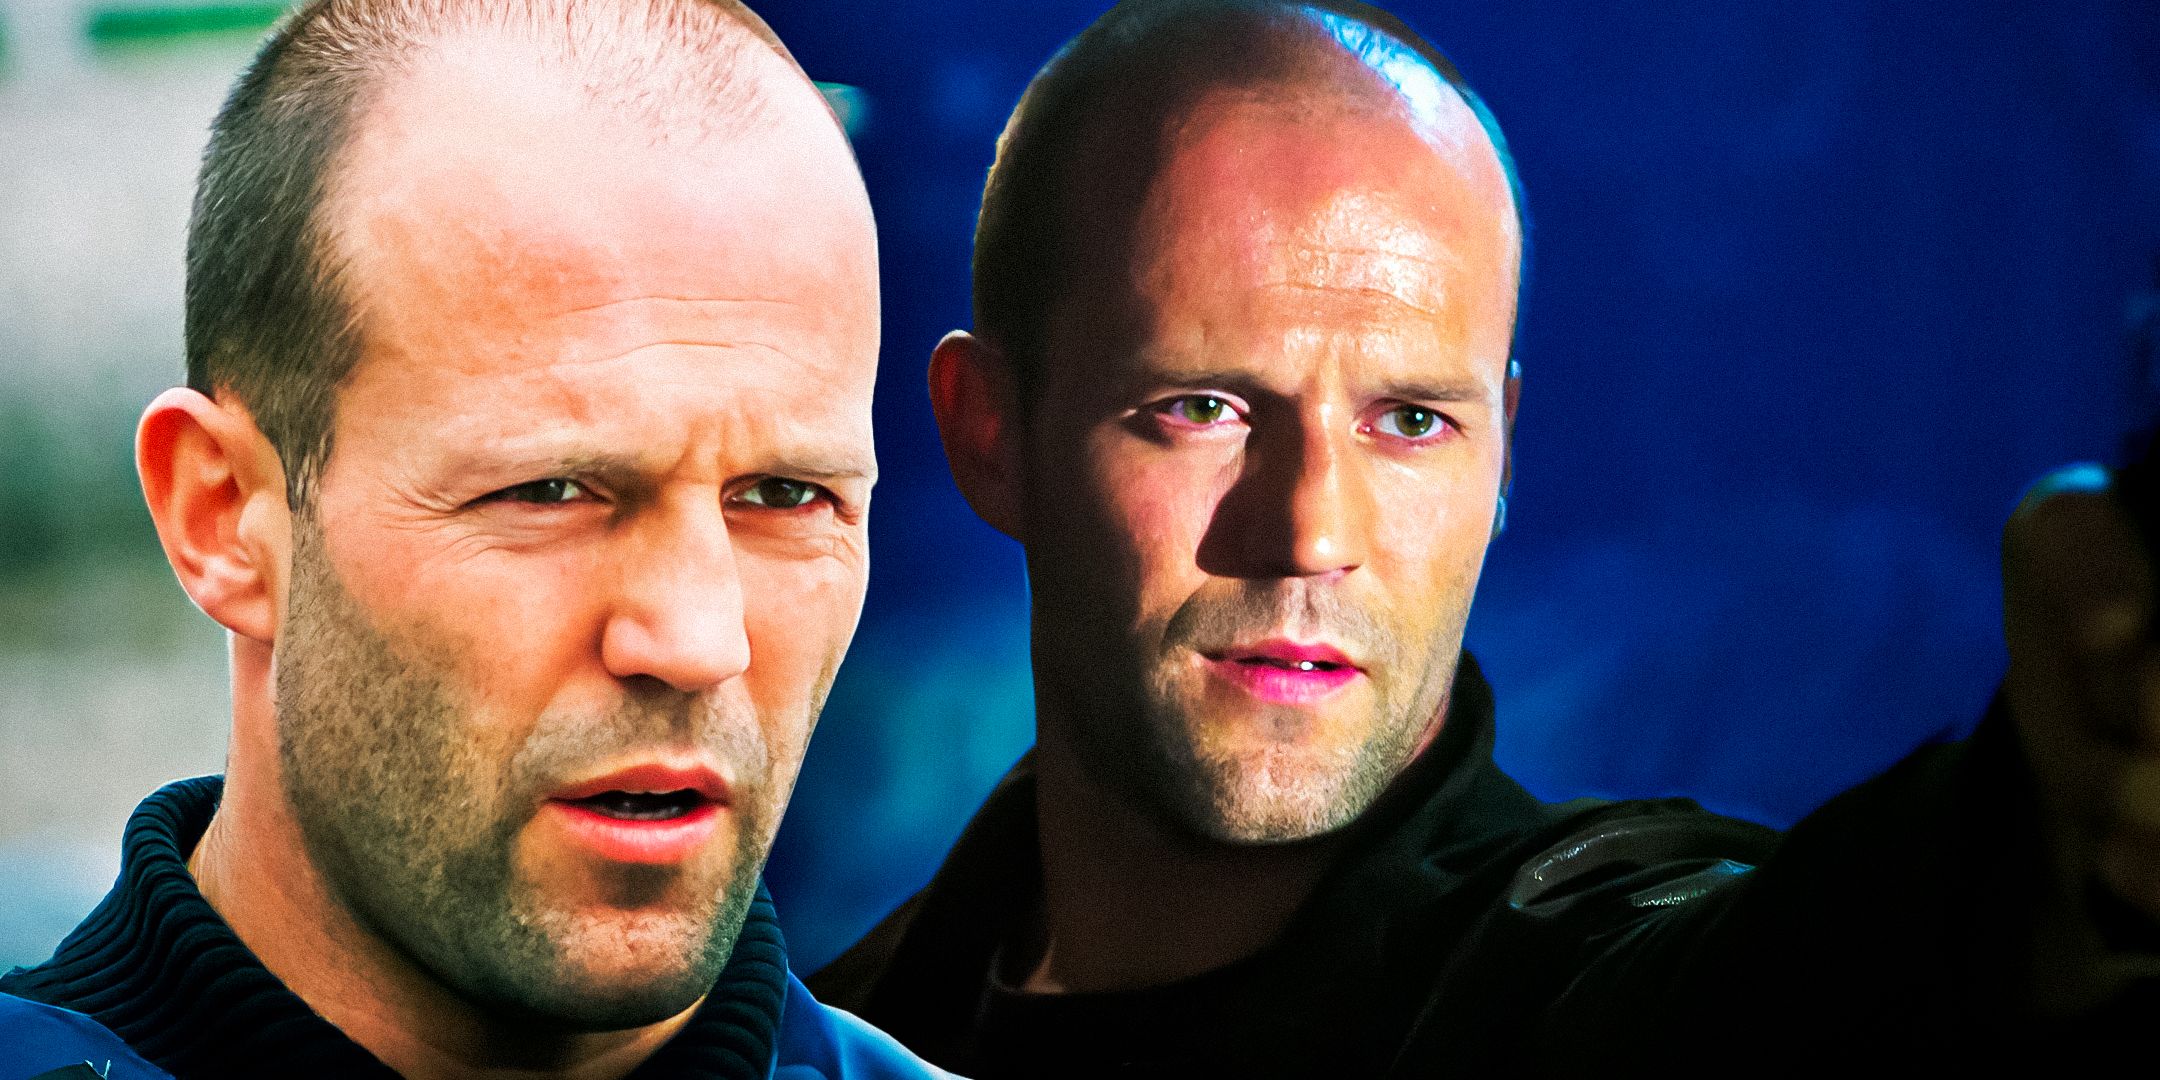 Jason Statham as Ethan from Cellular and as Quentin-Conners from Chaos